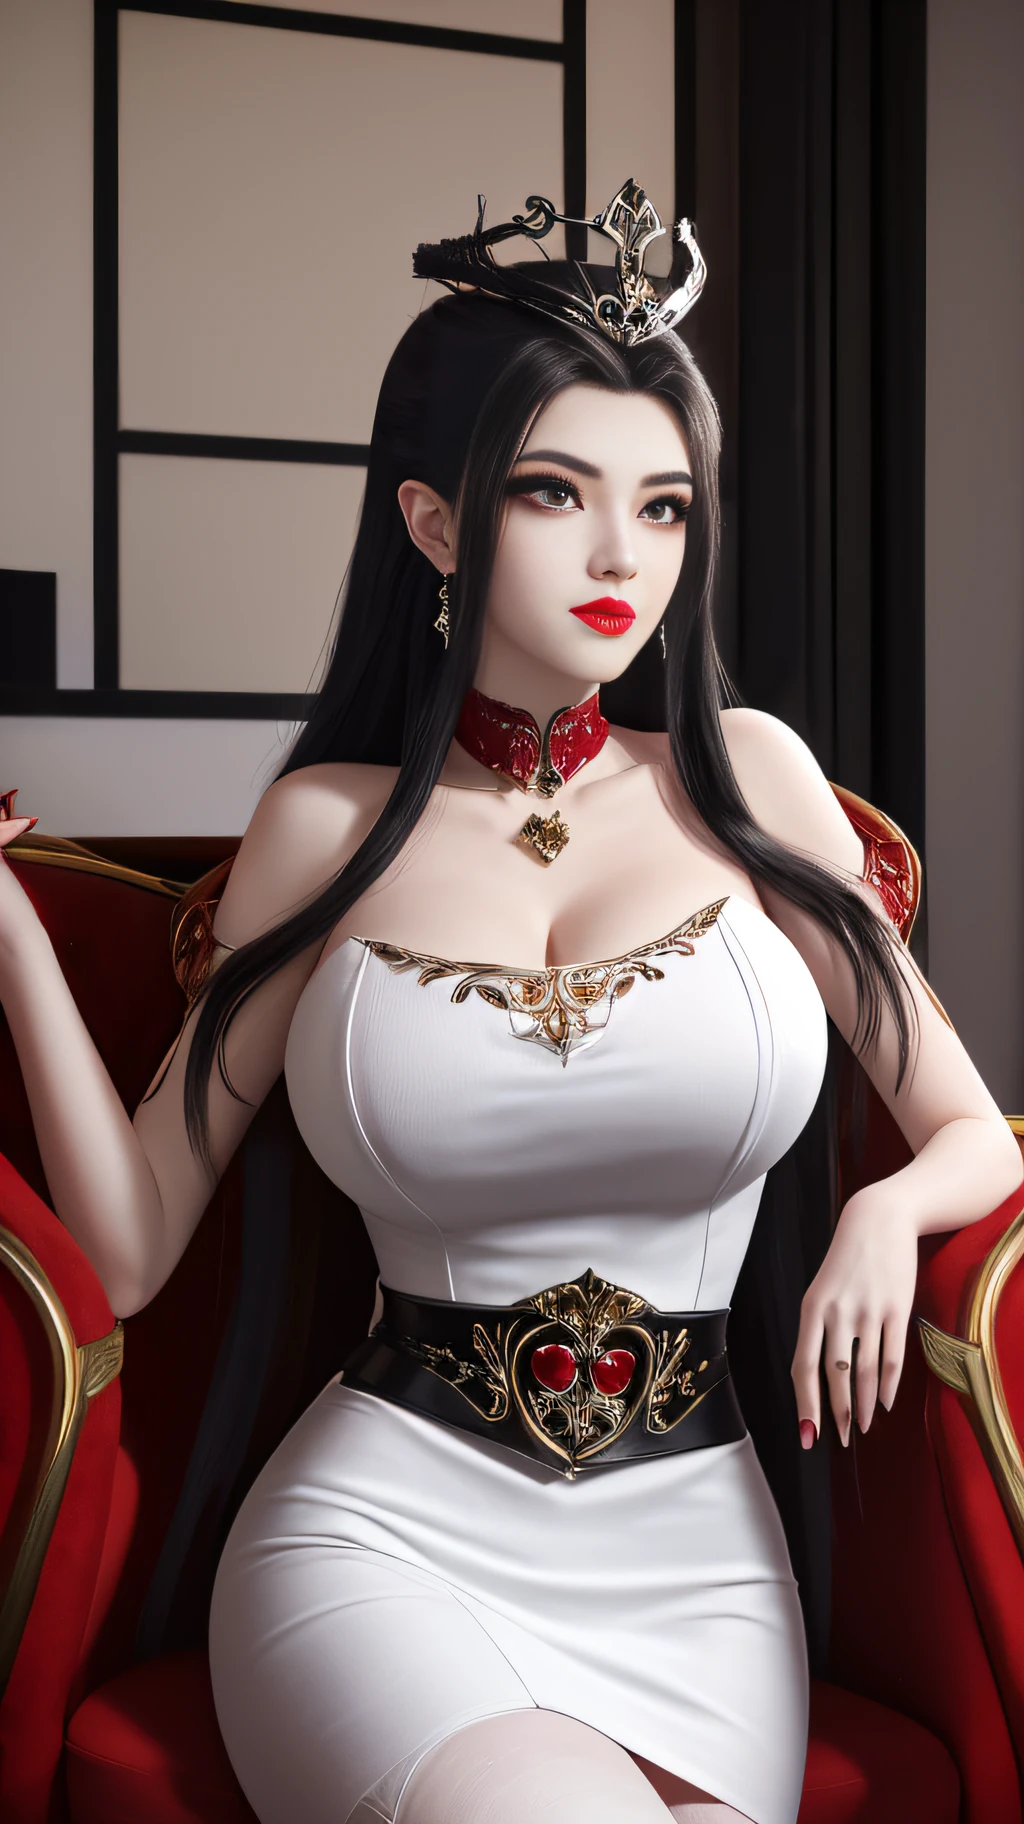 A beautiful queen, white shirt, black suit, black stockings, office, pen, beautiful face, long hair, mysterious neck and hair jewelry, light red iris, round big eyes, thin and sharp eyebrows, every detail details of meticulous and sharp eyelashes, red lipstick  lips, slender shoulders, (Big breasts: 1.2) Plump breasts, large, round and regular breasts, slender waist, RAW photos, detailed photos, highest quality photos, 8k queen, long legs, stockings,